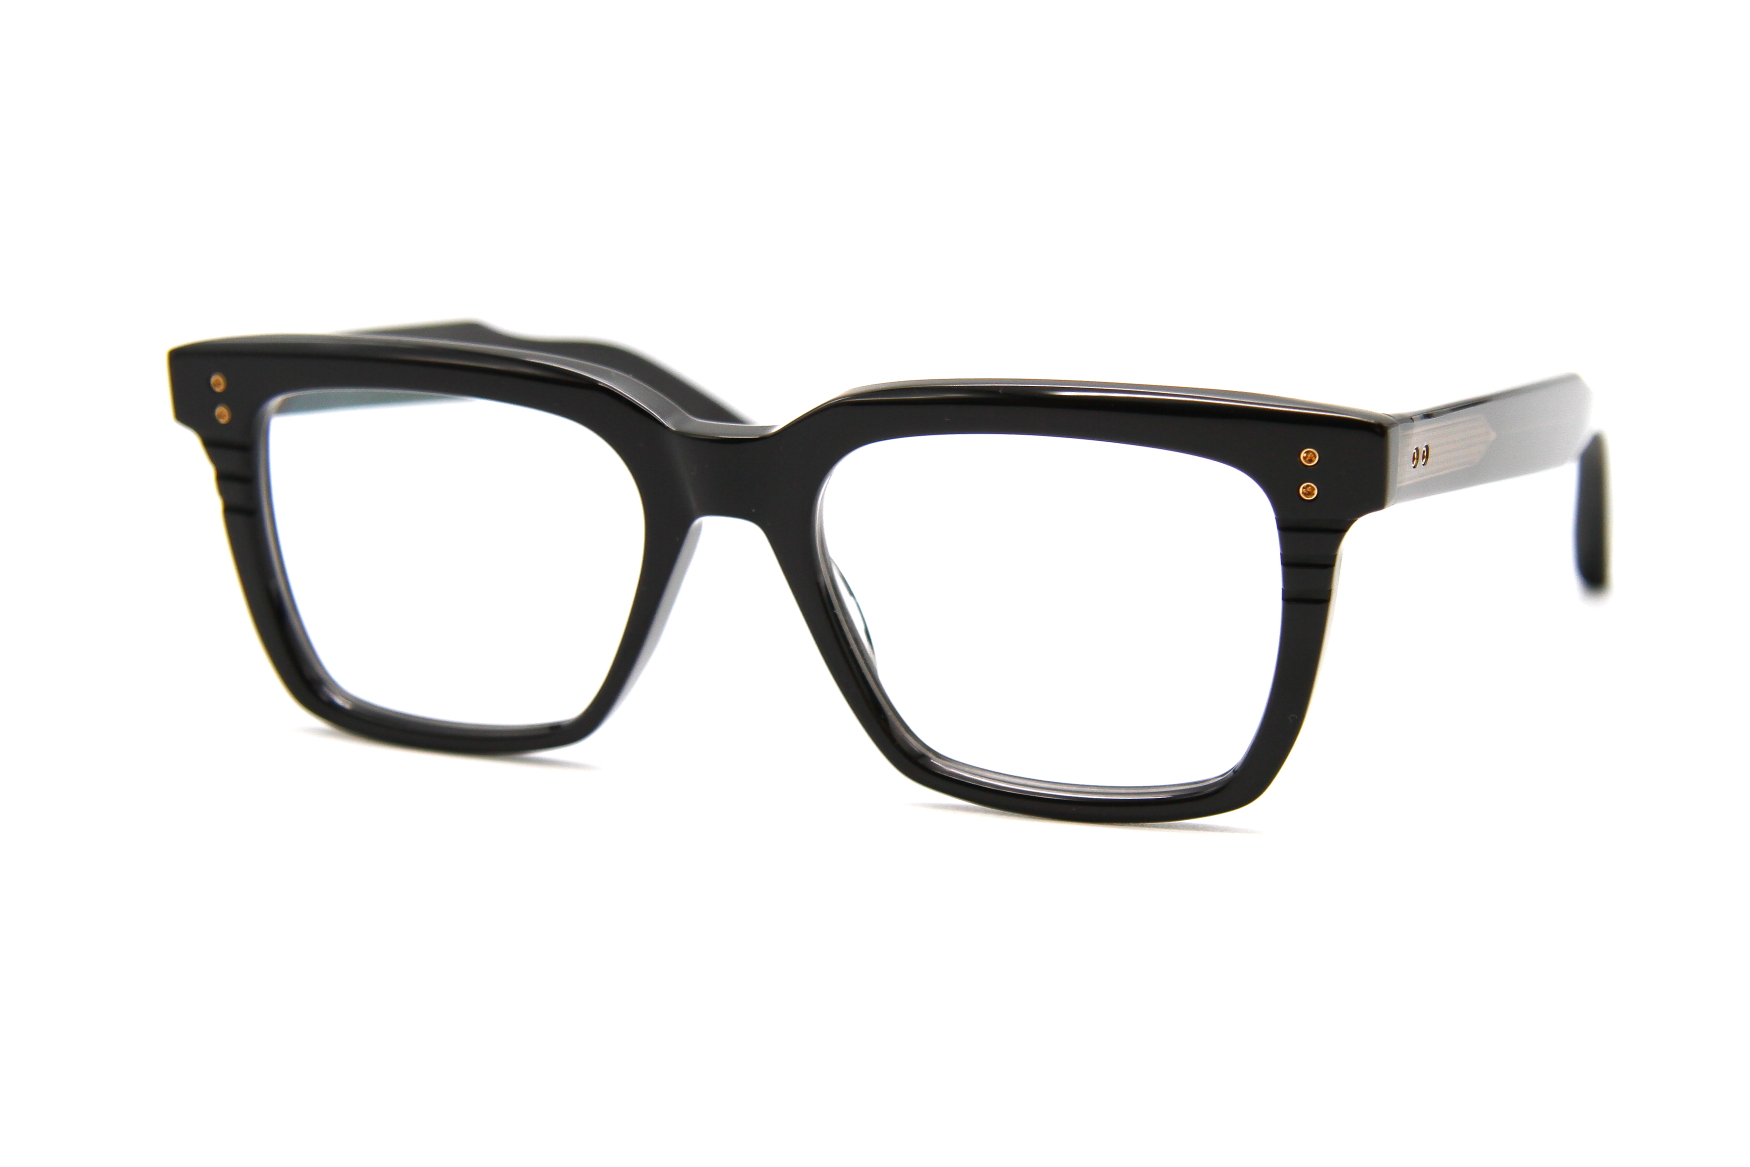 SEQUOIA DRX-2086-F-BLK-54